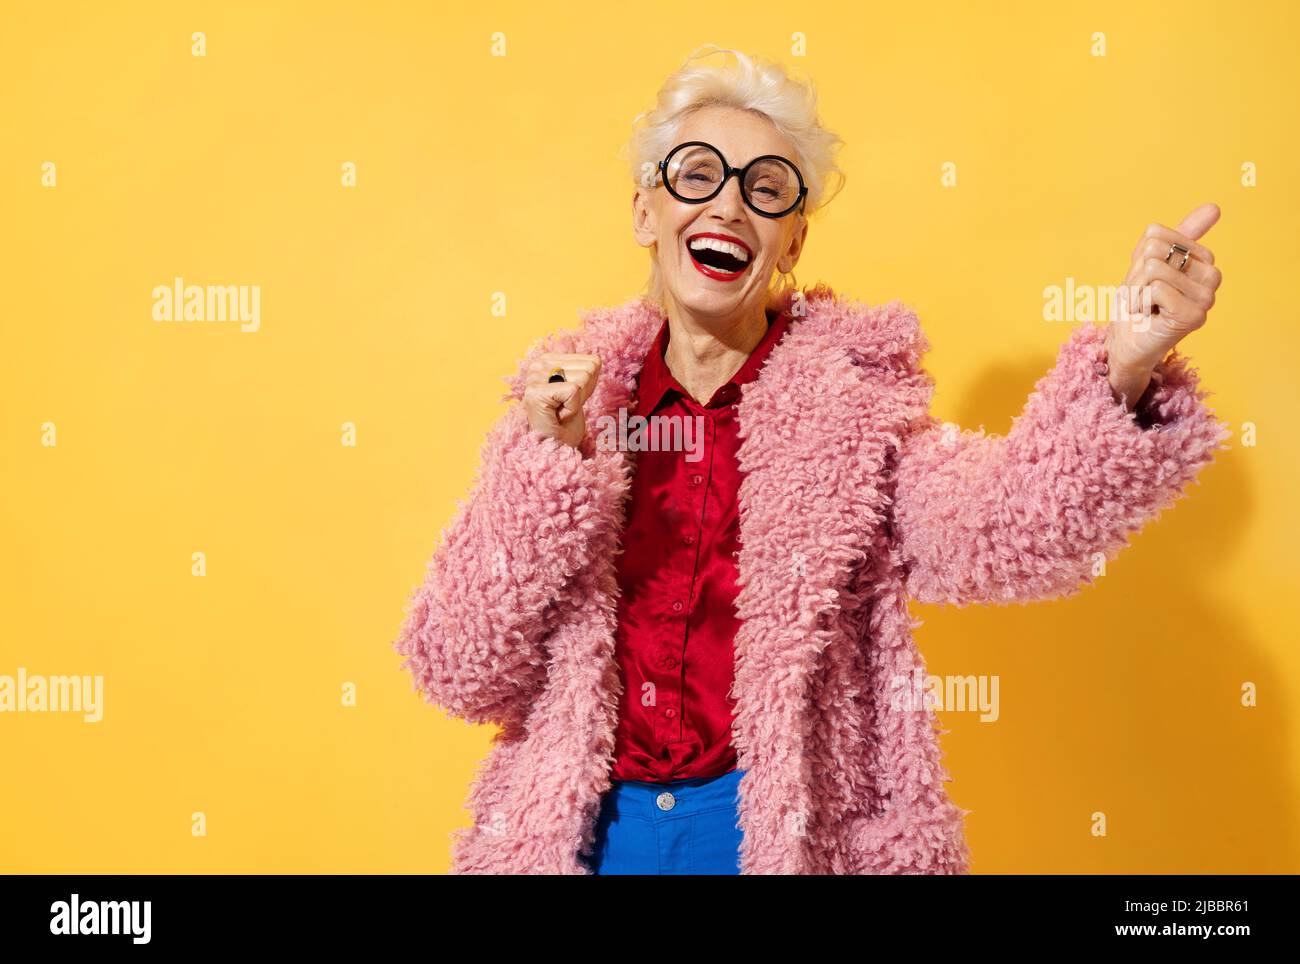 Happy and playful mature woman dancing, smiling and having fun. Photo of elderly woman above 70 years old in stylish outfit on yellow background Stock Photo